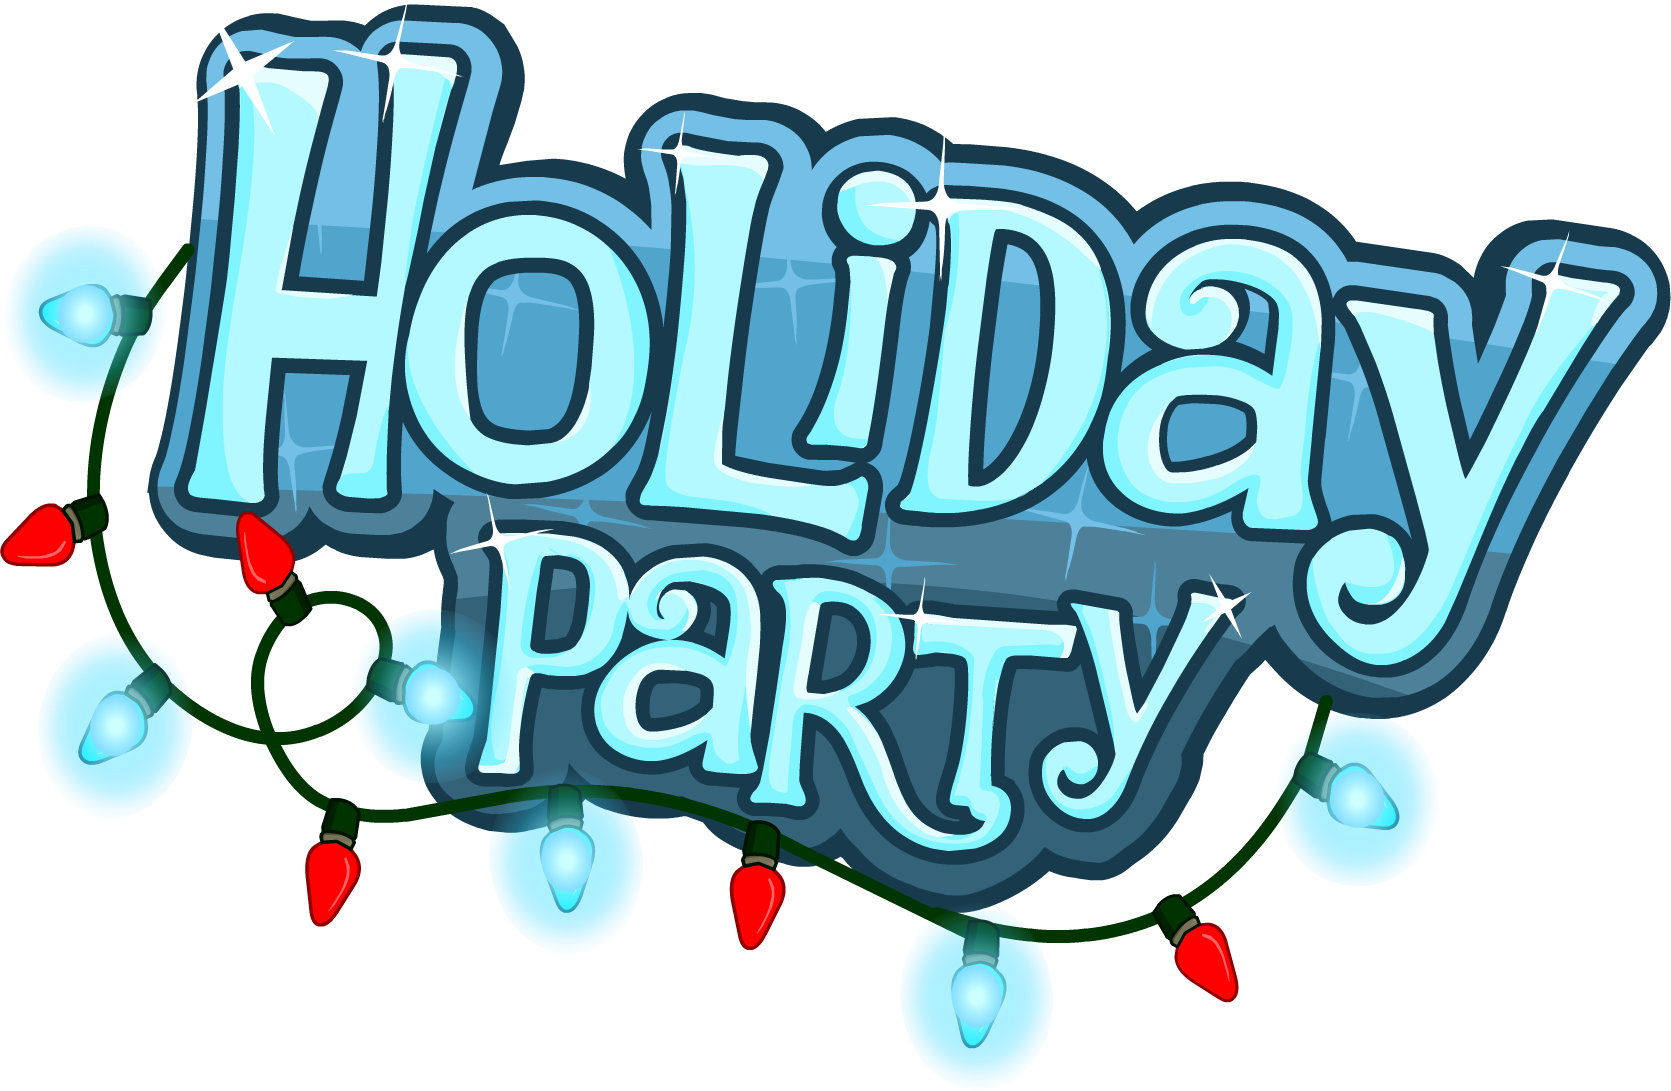 free office holiday party clipart - Clipground